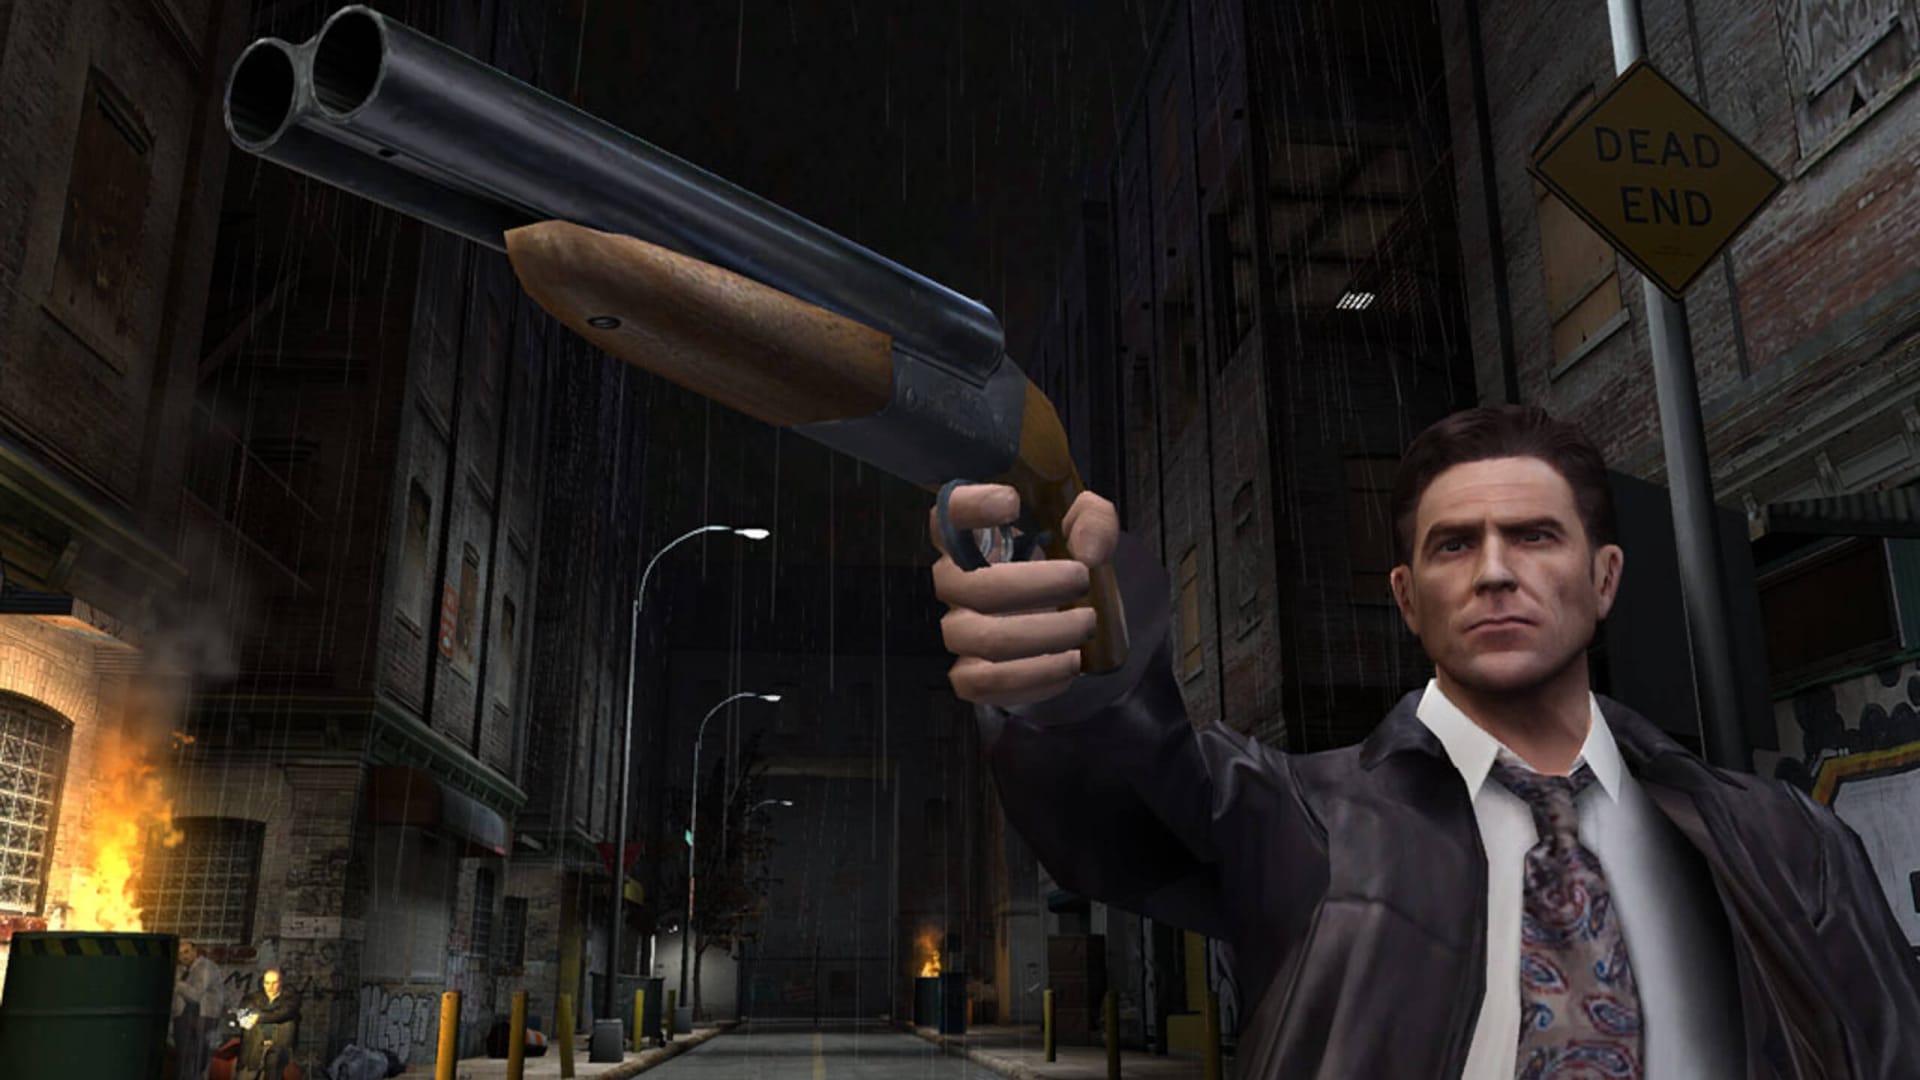 10 Years On, Max Payne 3's Airport Shootout Is Still Sensational